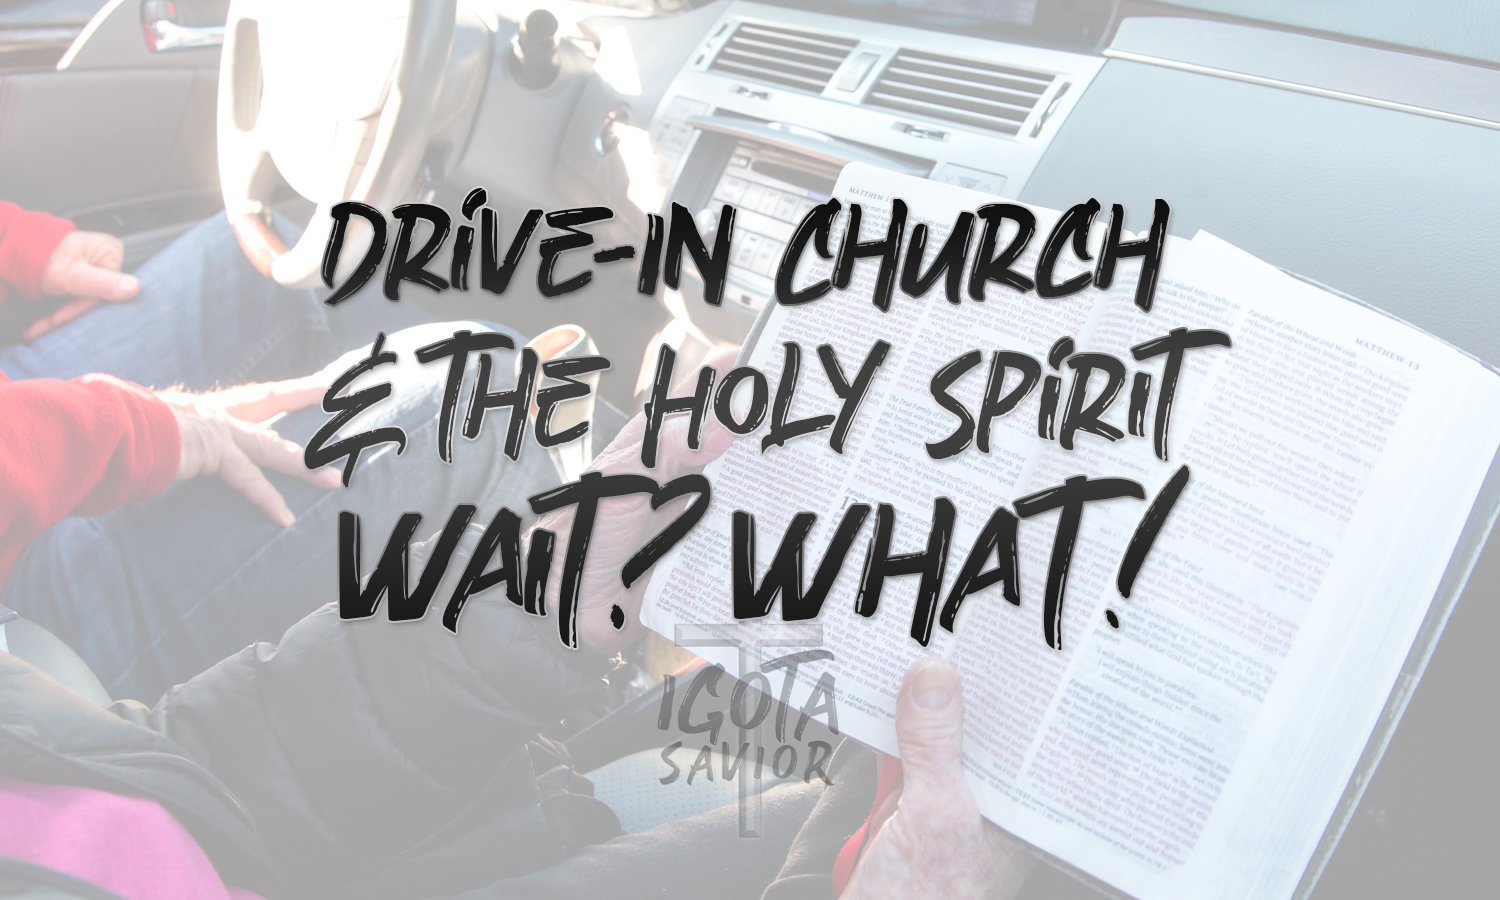 Drive-In Church and the Holy Spirit. WAIT! WHAT